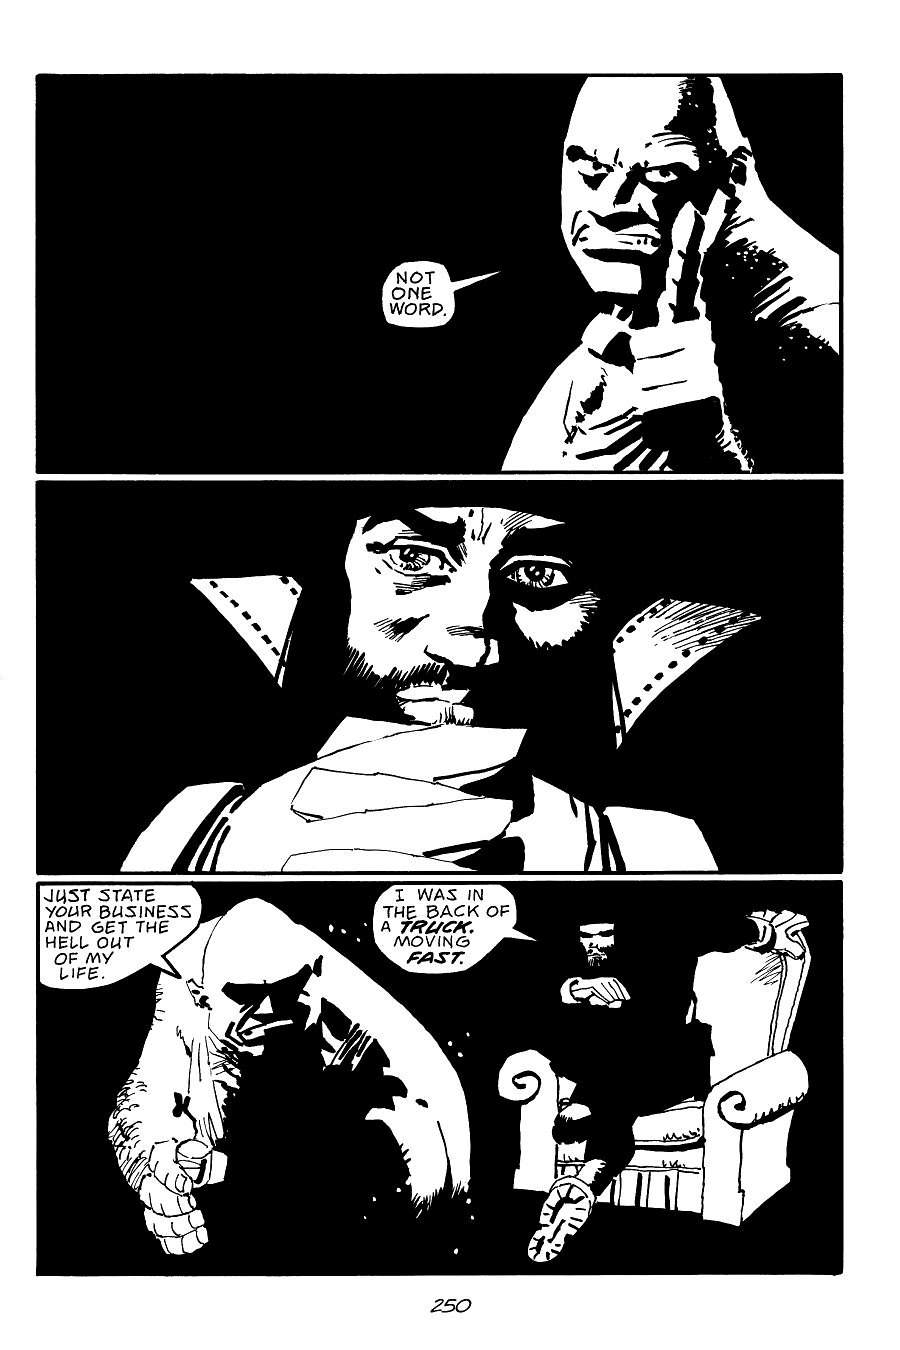 page 250 of sin city 7 hell and back